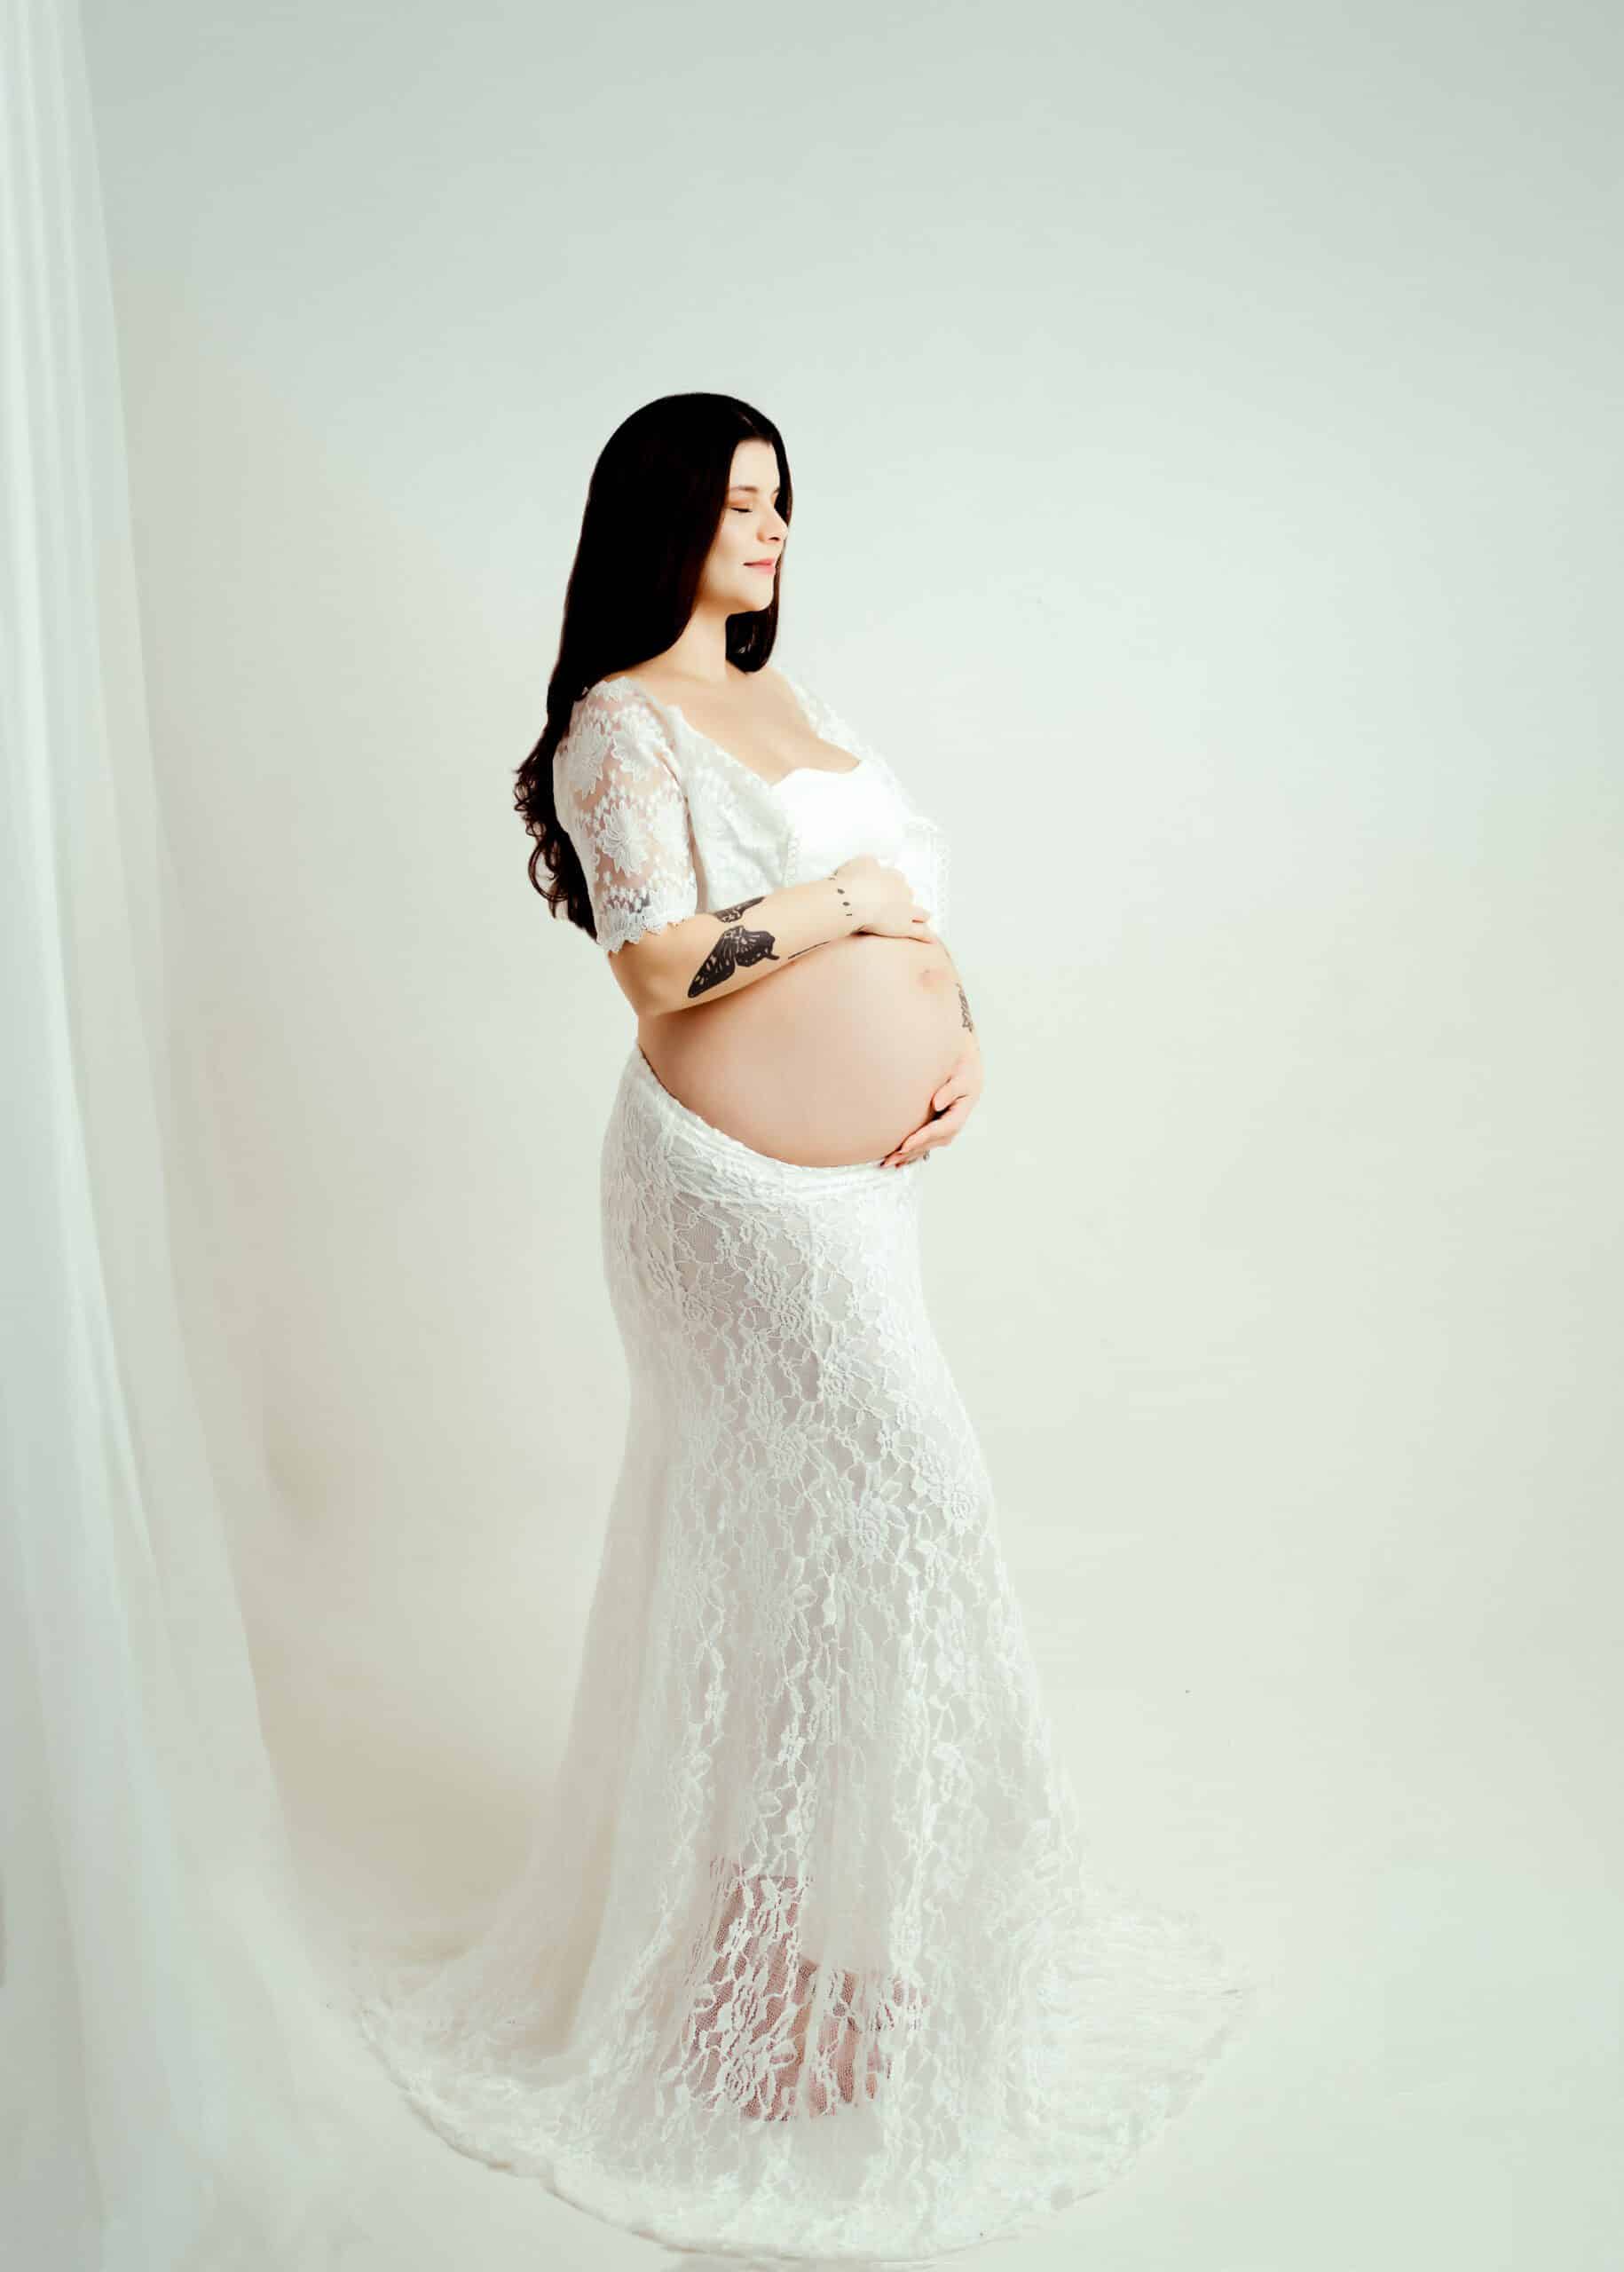 "Serene white maternity session featuring a peaceful expectant mother in a clean and bright setting, highlighting the purity and tranquility of this special moment